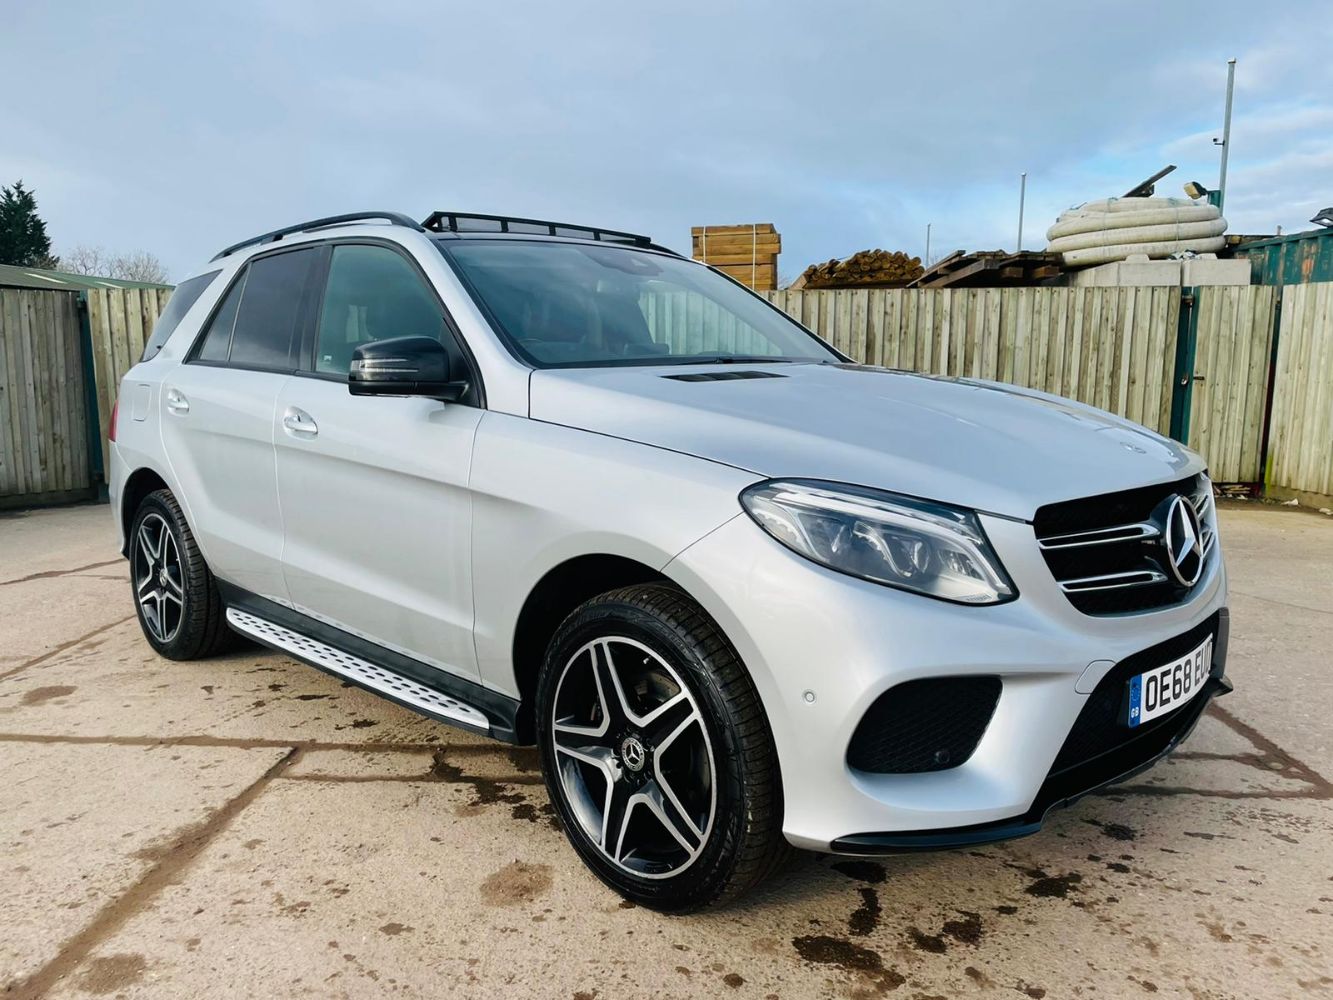 2019 Mercedes-Benz GLE 350d *AMG Premium Plus Night Edition* - Range Rover Sport *Autobiography Dynamic* +Many More: Cars, Commercials & 4x4's !